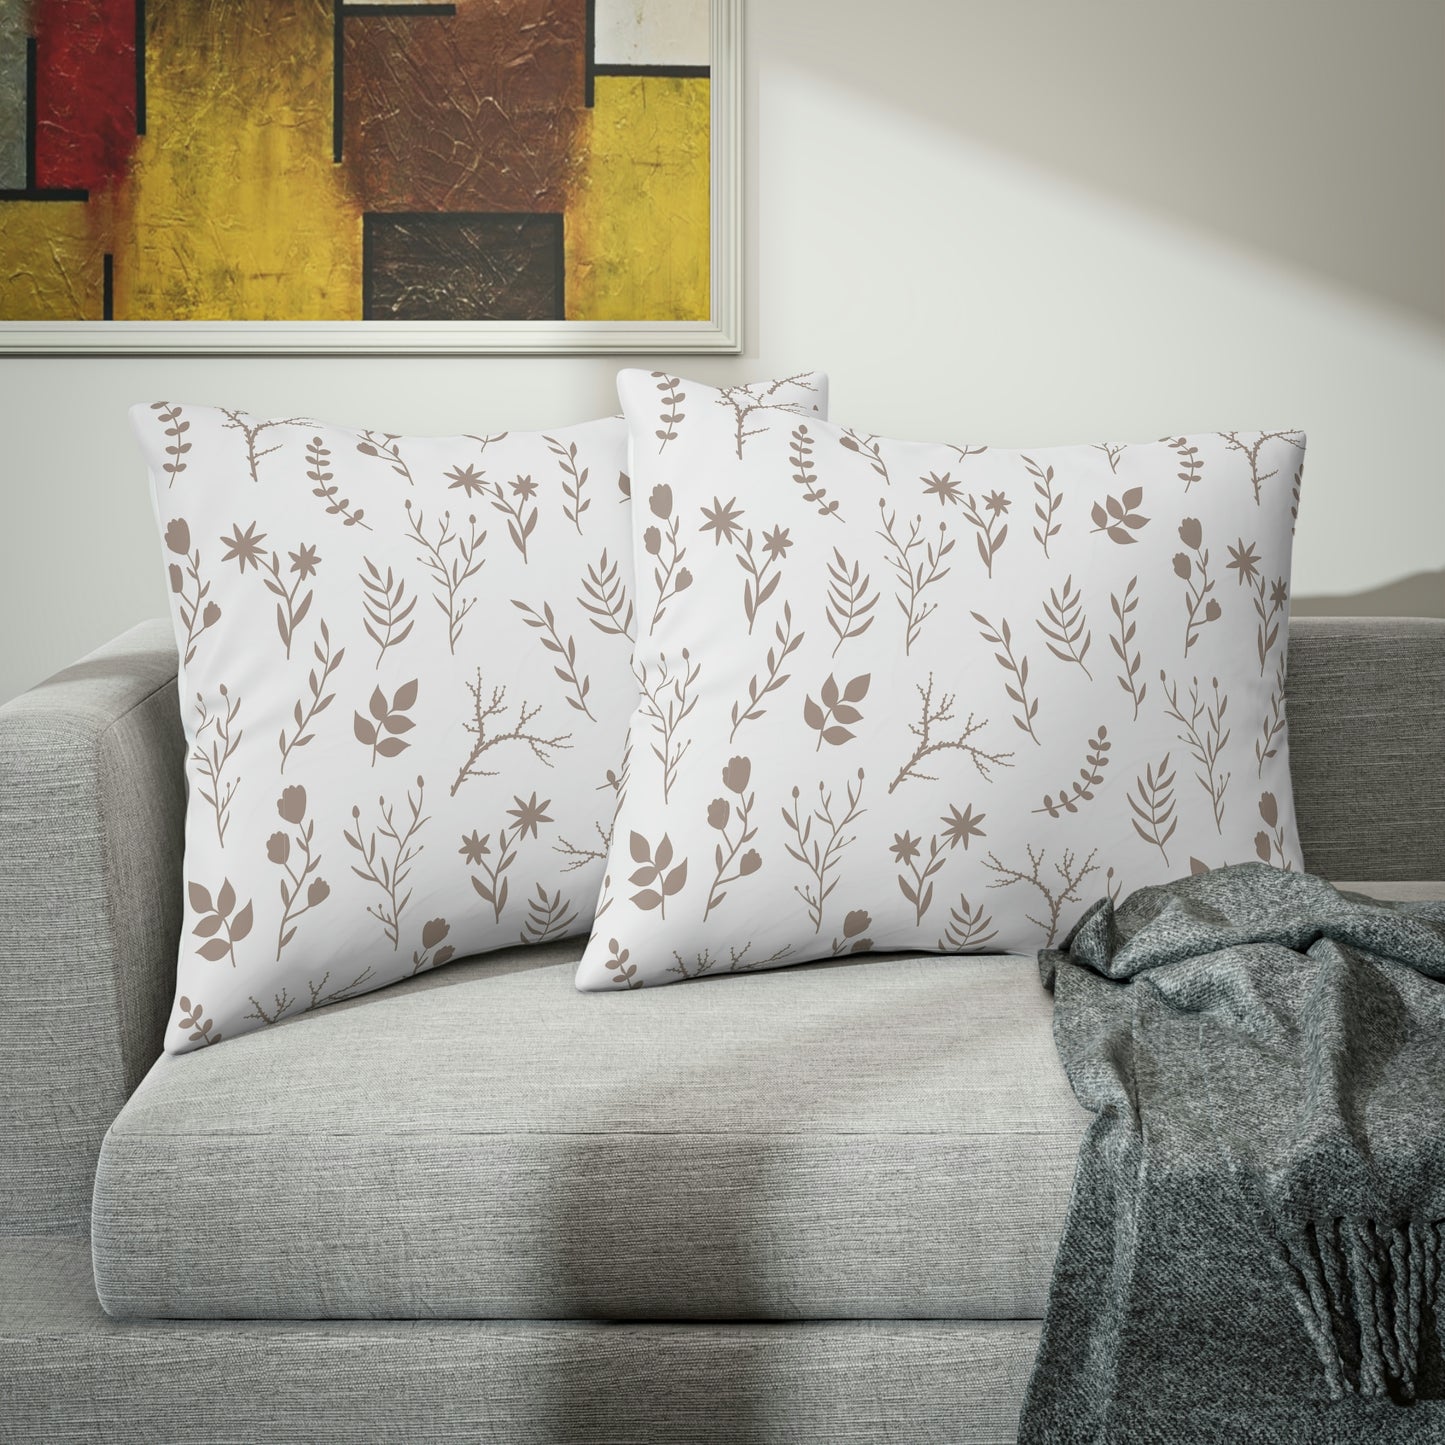 1 Cream and White Floral Print Pillowcase | Floral Pillowcase for Bedroom - Home Stitchery Decor